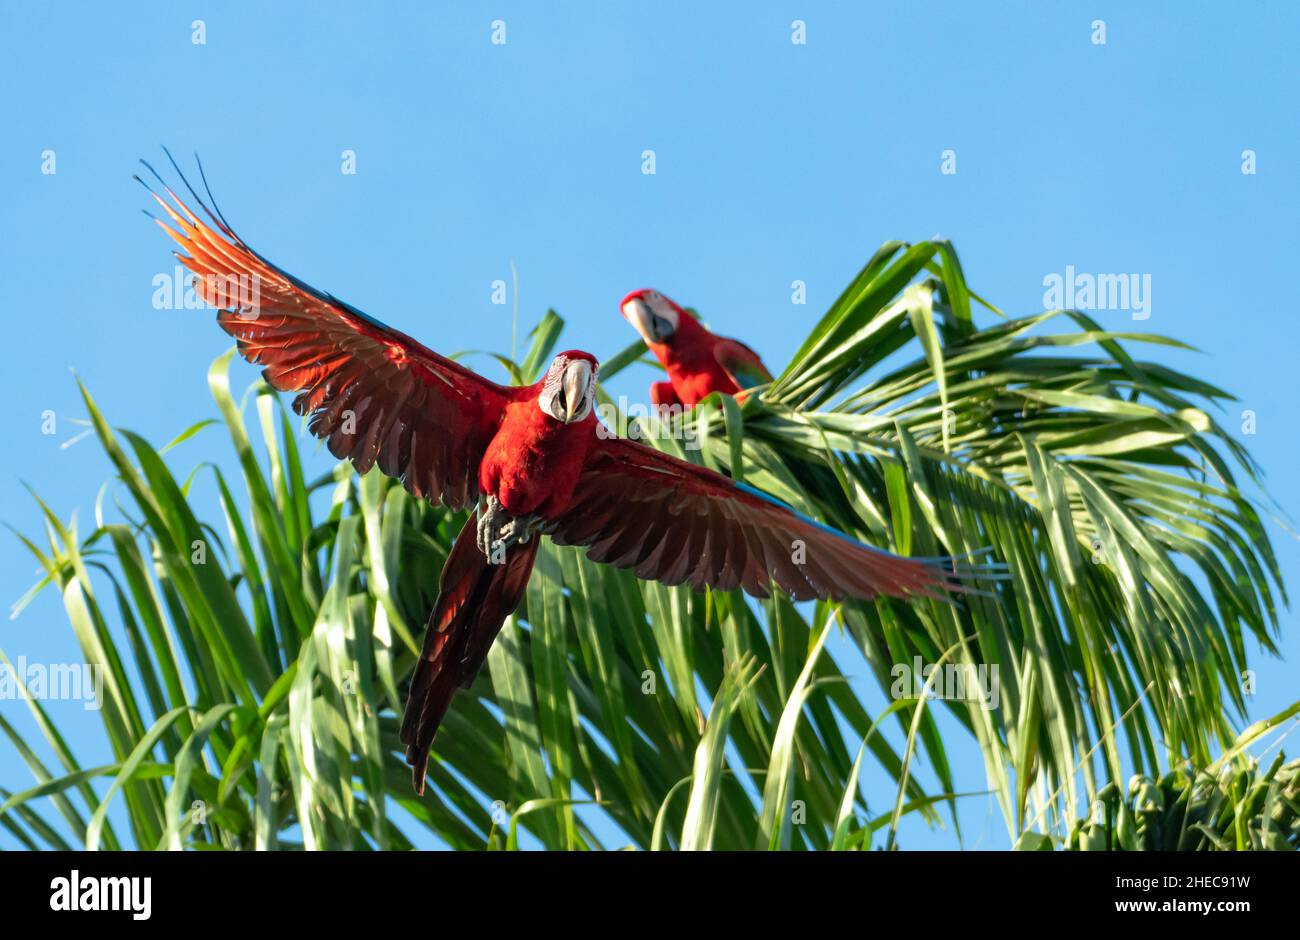 A pair of Red and Green Macaws, Ara chloropterus, one flying and one perching in a palm tree. Stock Photo